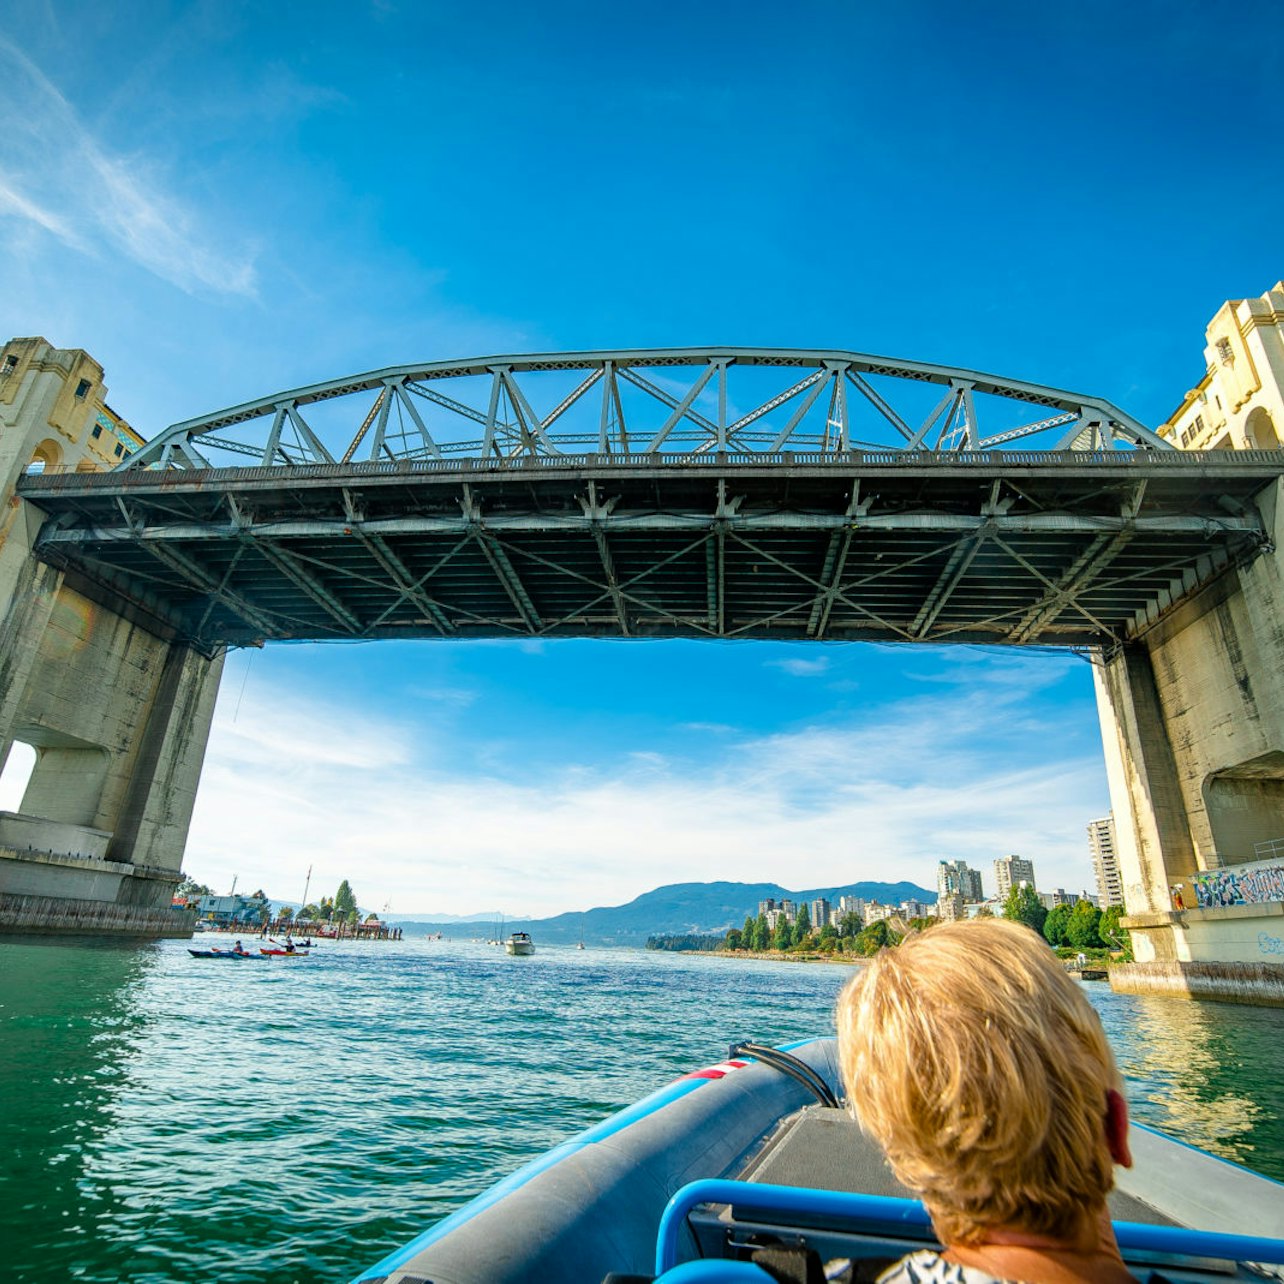 City and Seal Cruise from Vancouver - Accommodations in Vancouver